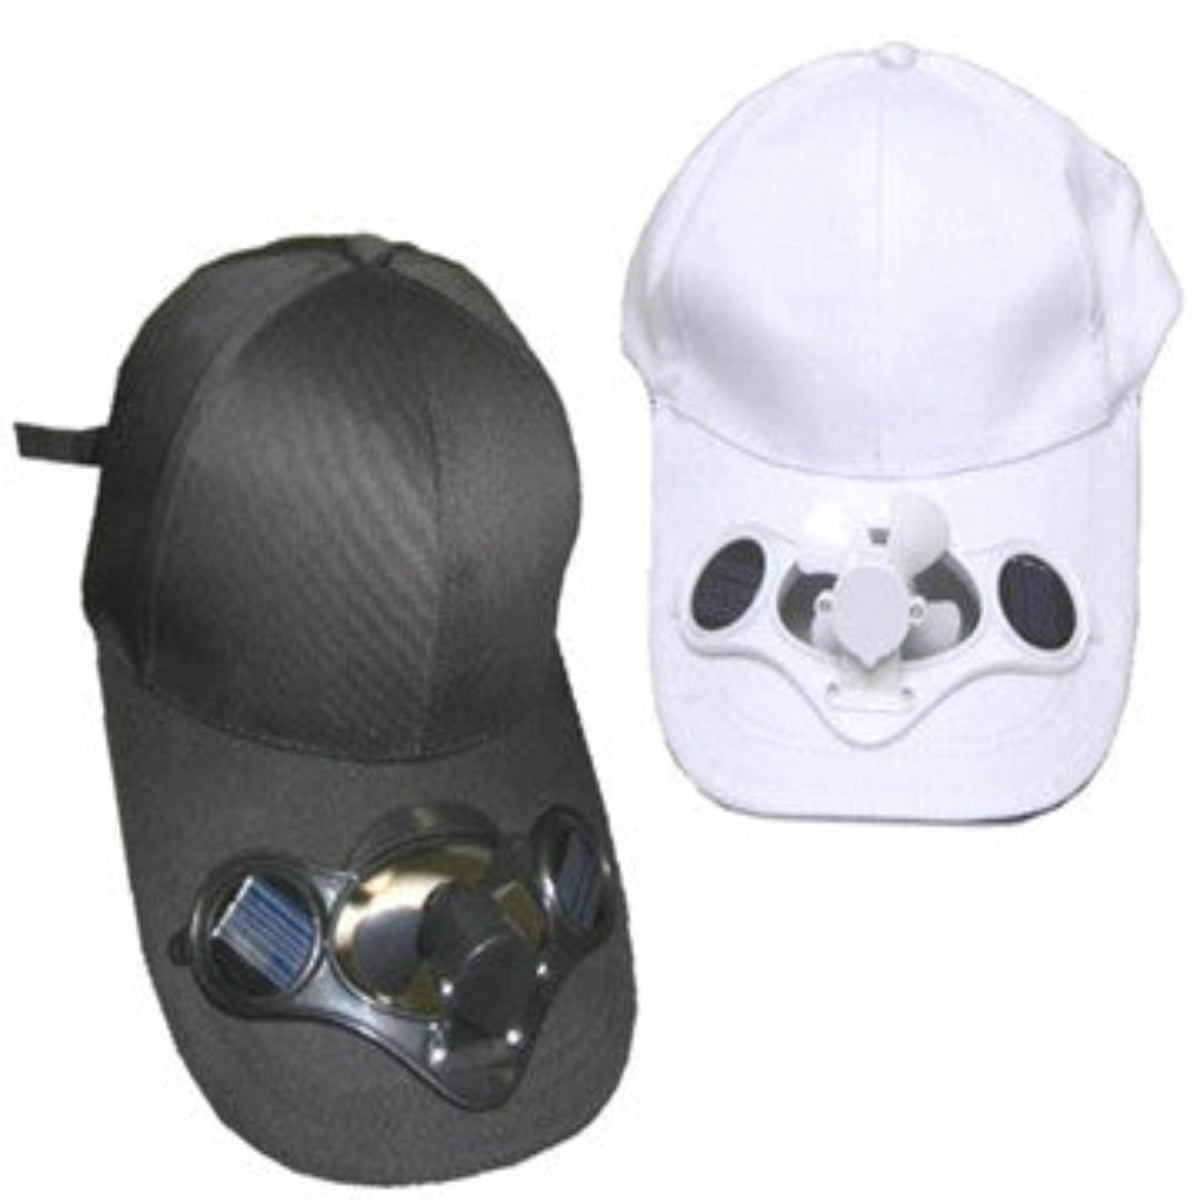 New Arrival Solar Powered Fan Hat Manufacturer, High Quality New Arrival Solar  Powered Fan Hat Manufacturer on